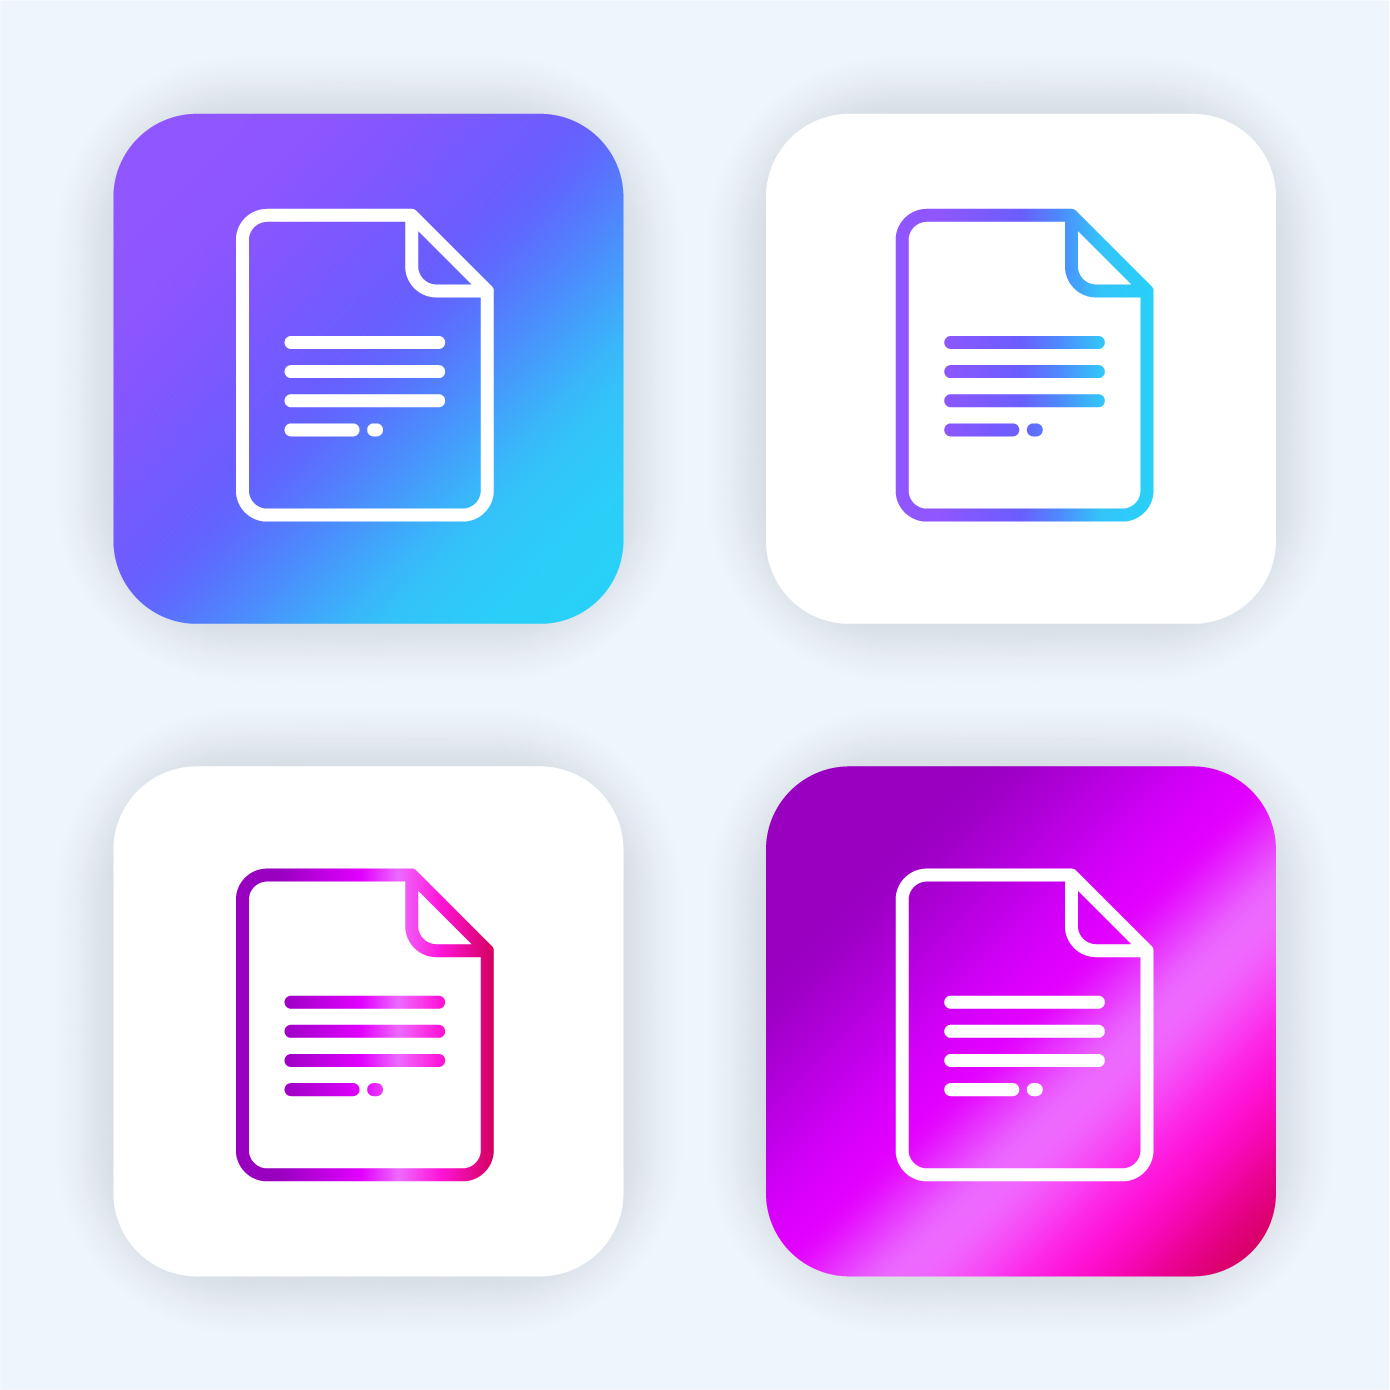 4 document icons set in a square in blue, white, pink, and purple